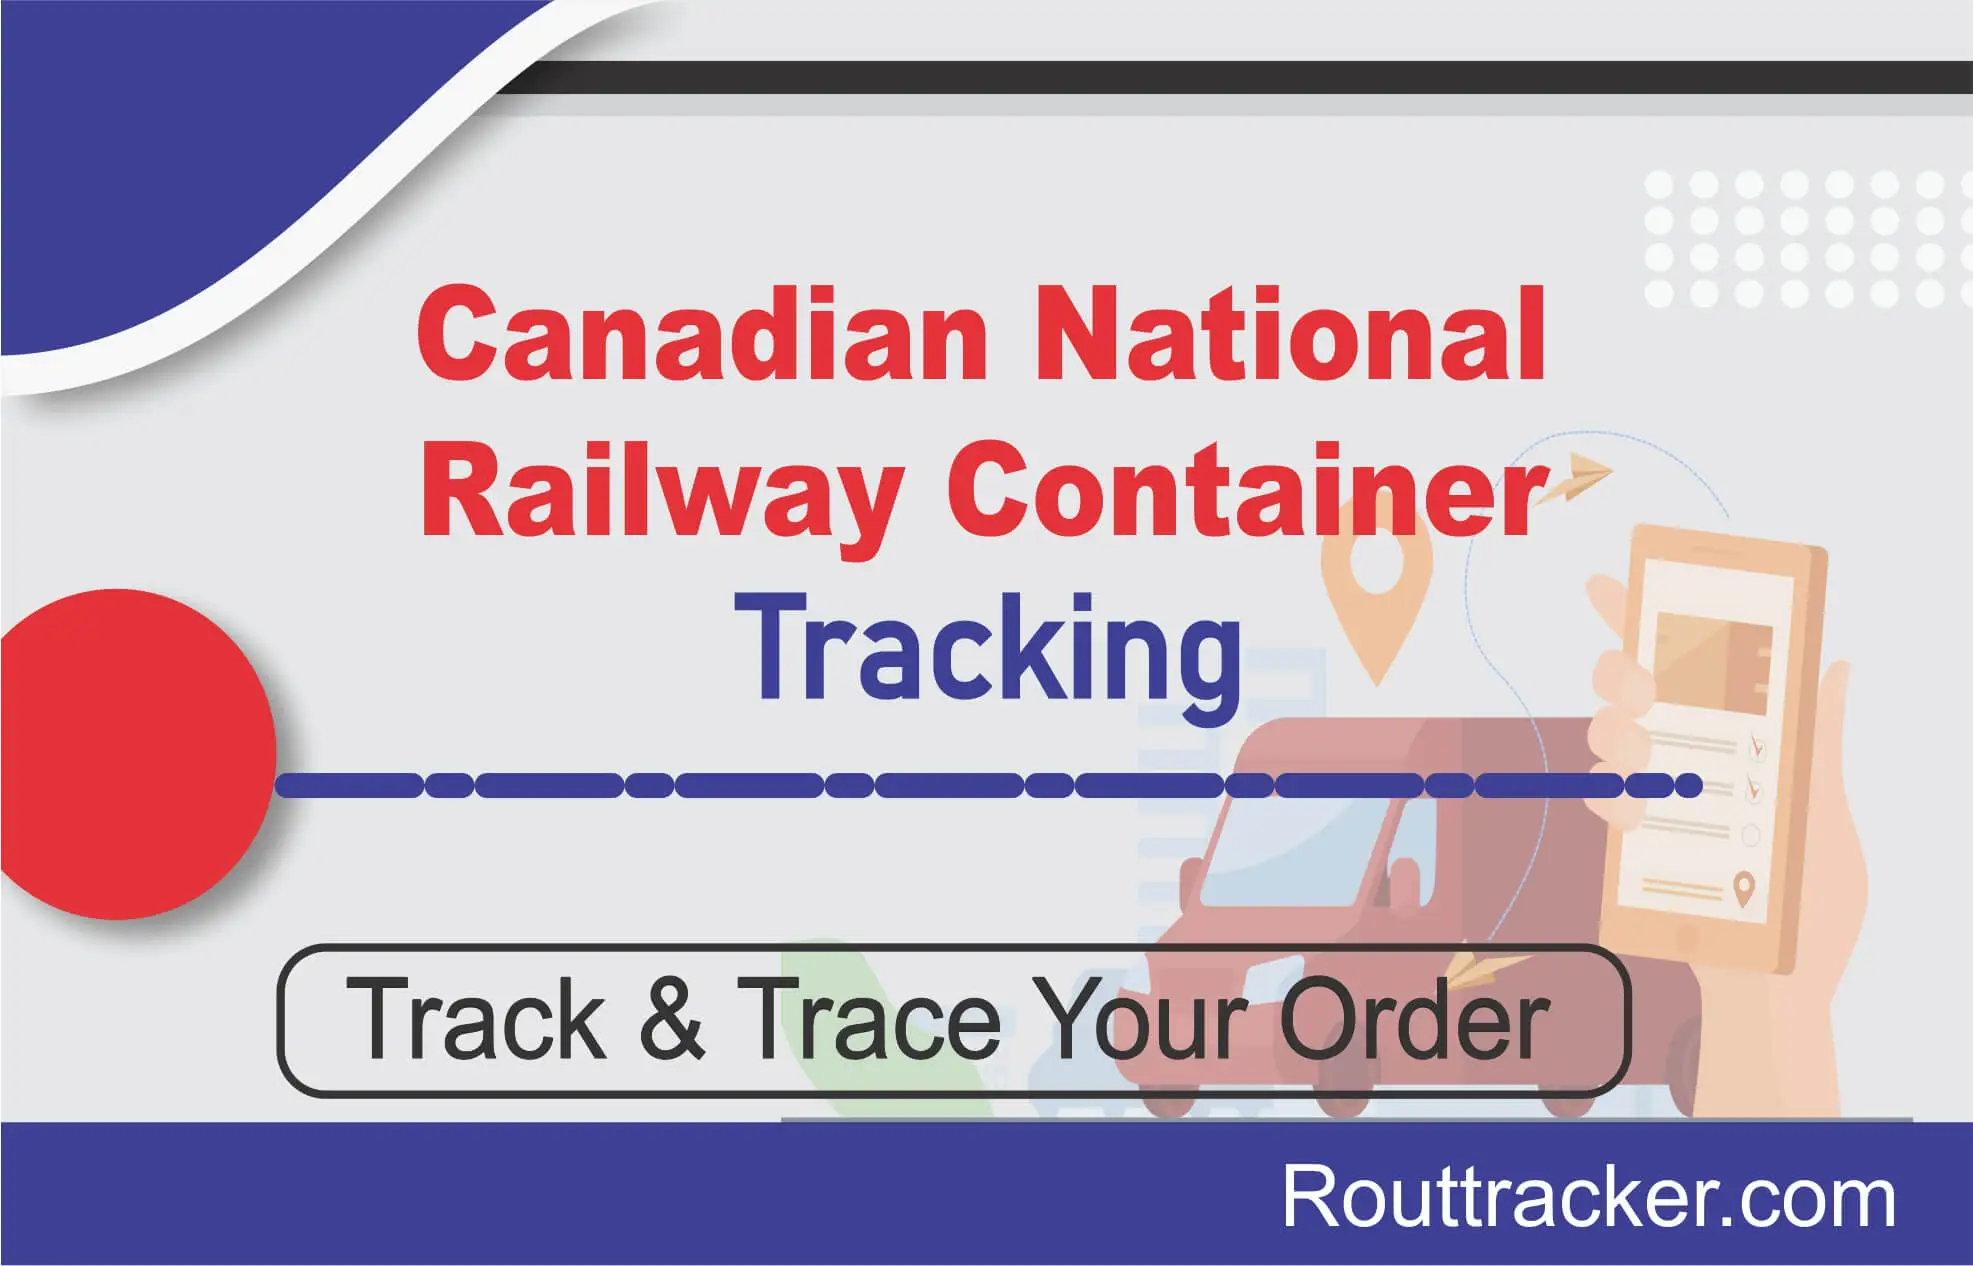 Canadian National Railway Container Tracking